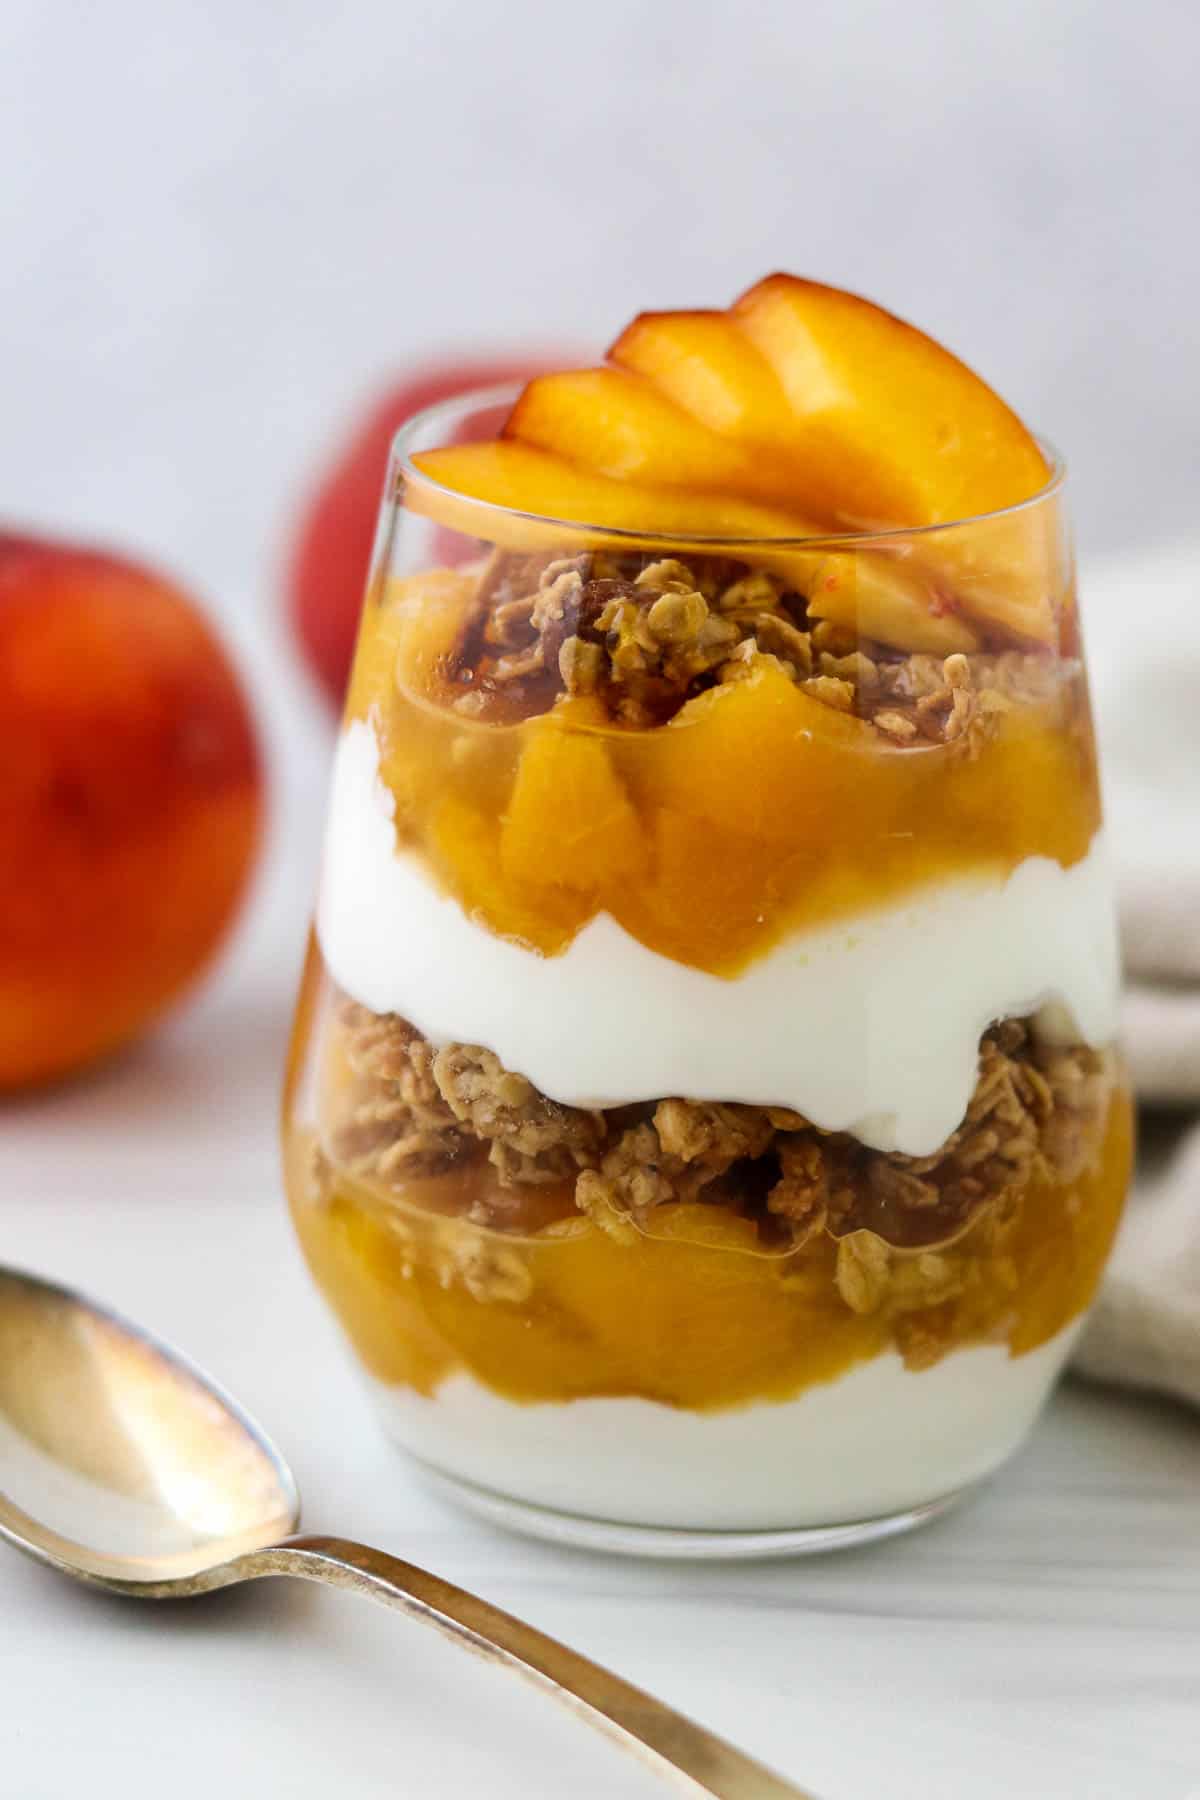 Yogurt and granola parfait layered with peach compote next to a spoon.